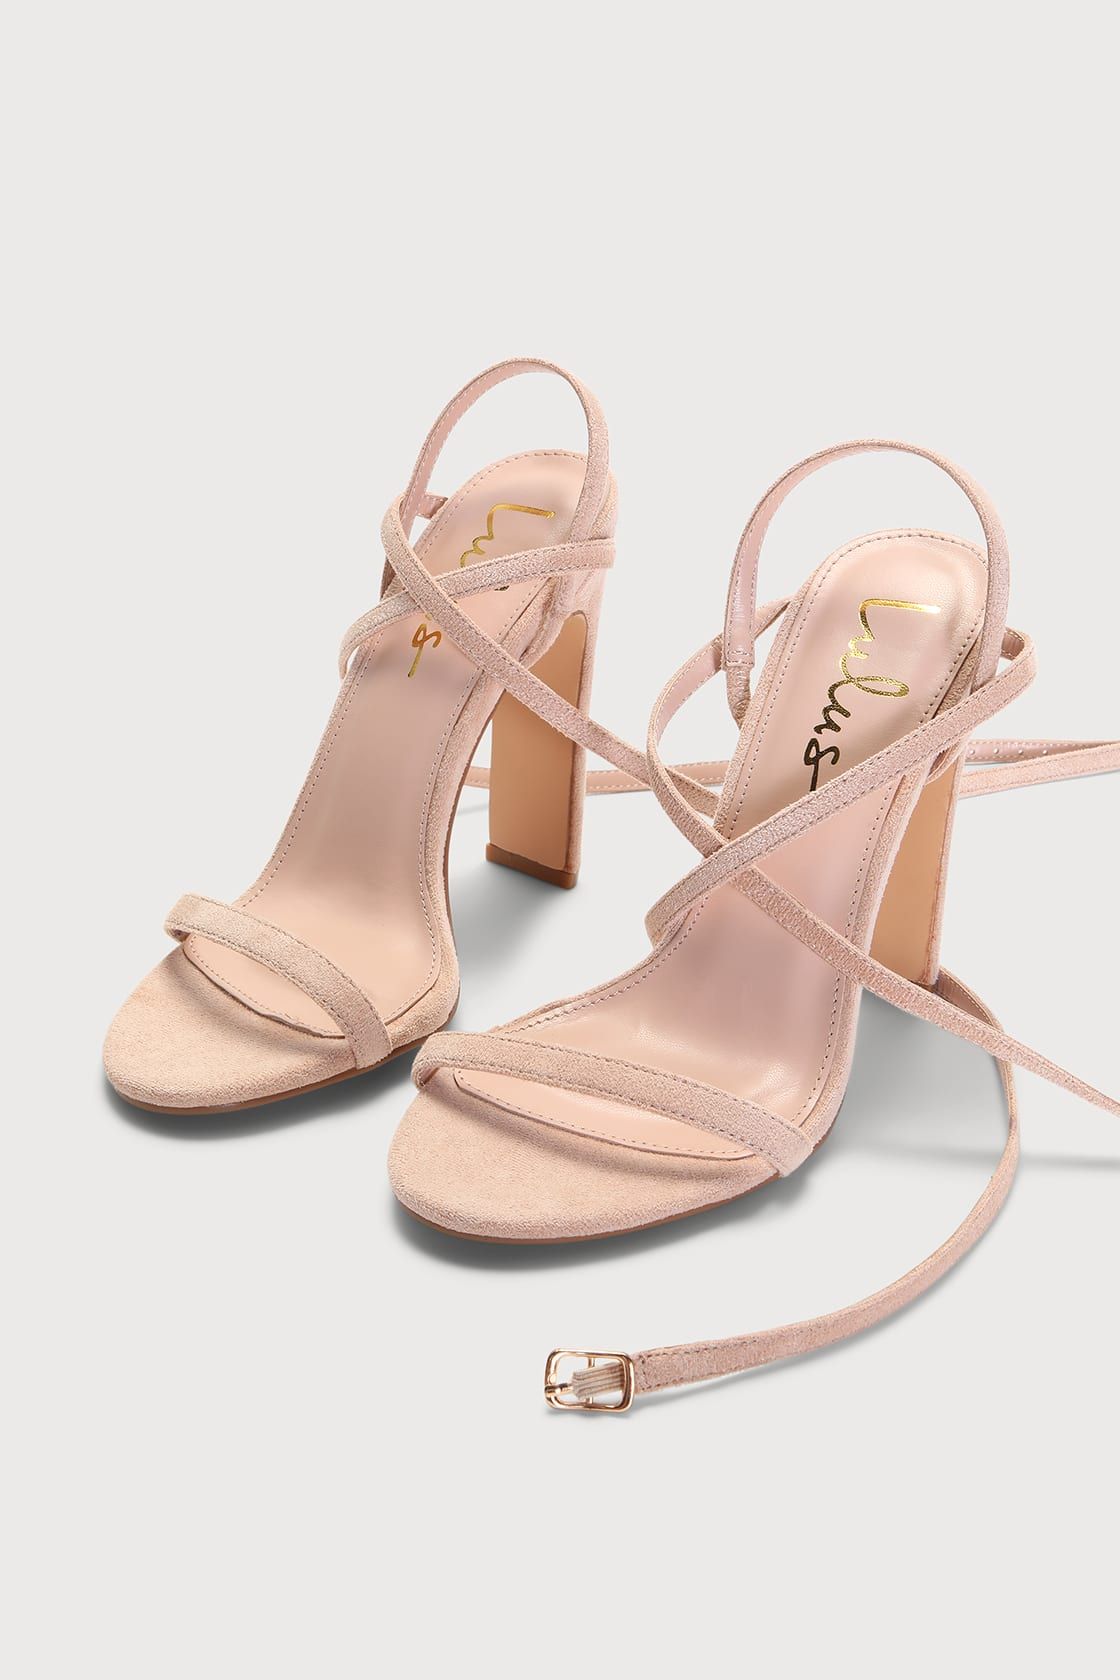 Yakes Light Nude Suede Ankle Wrap High Heel Sandals | Lulus (US)